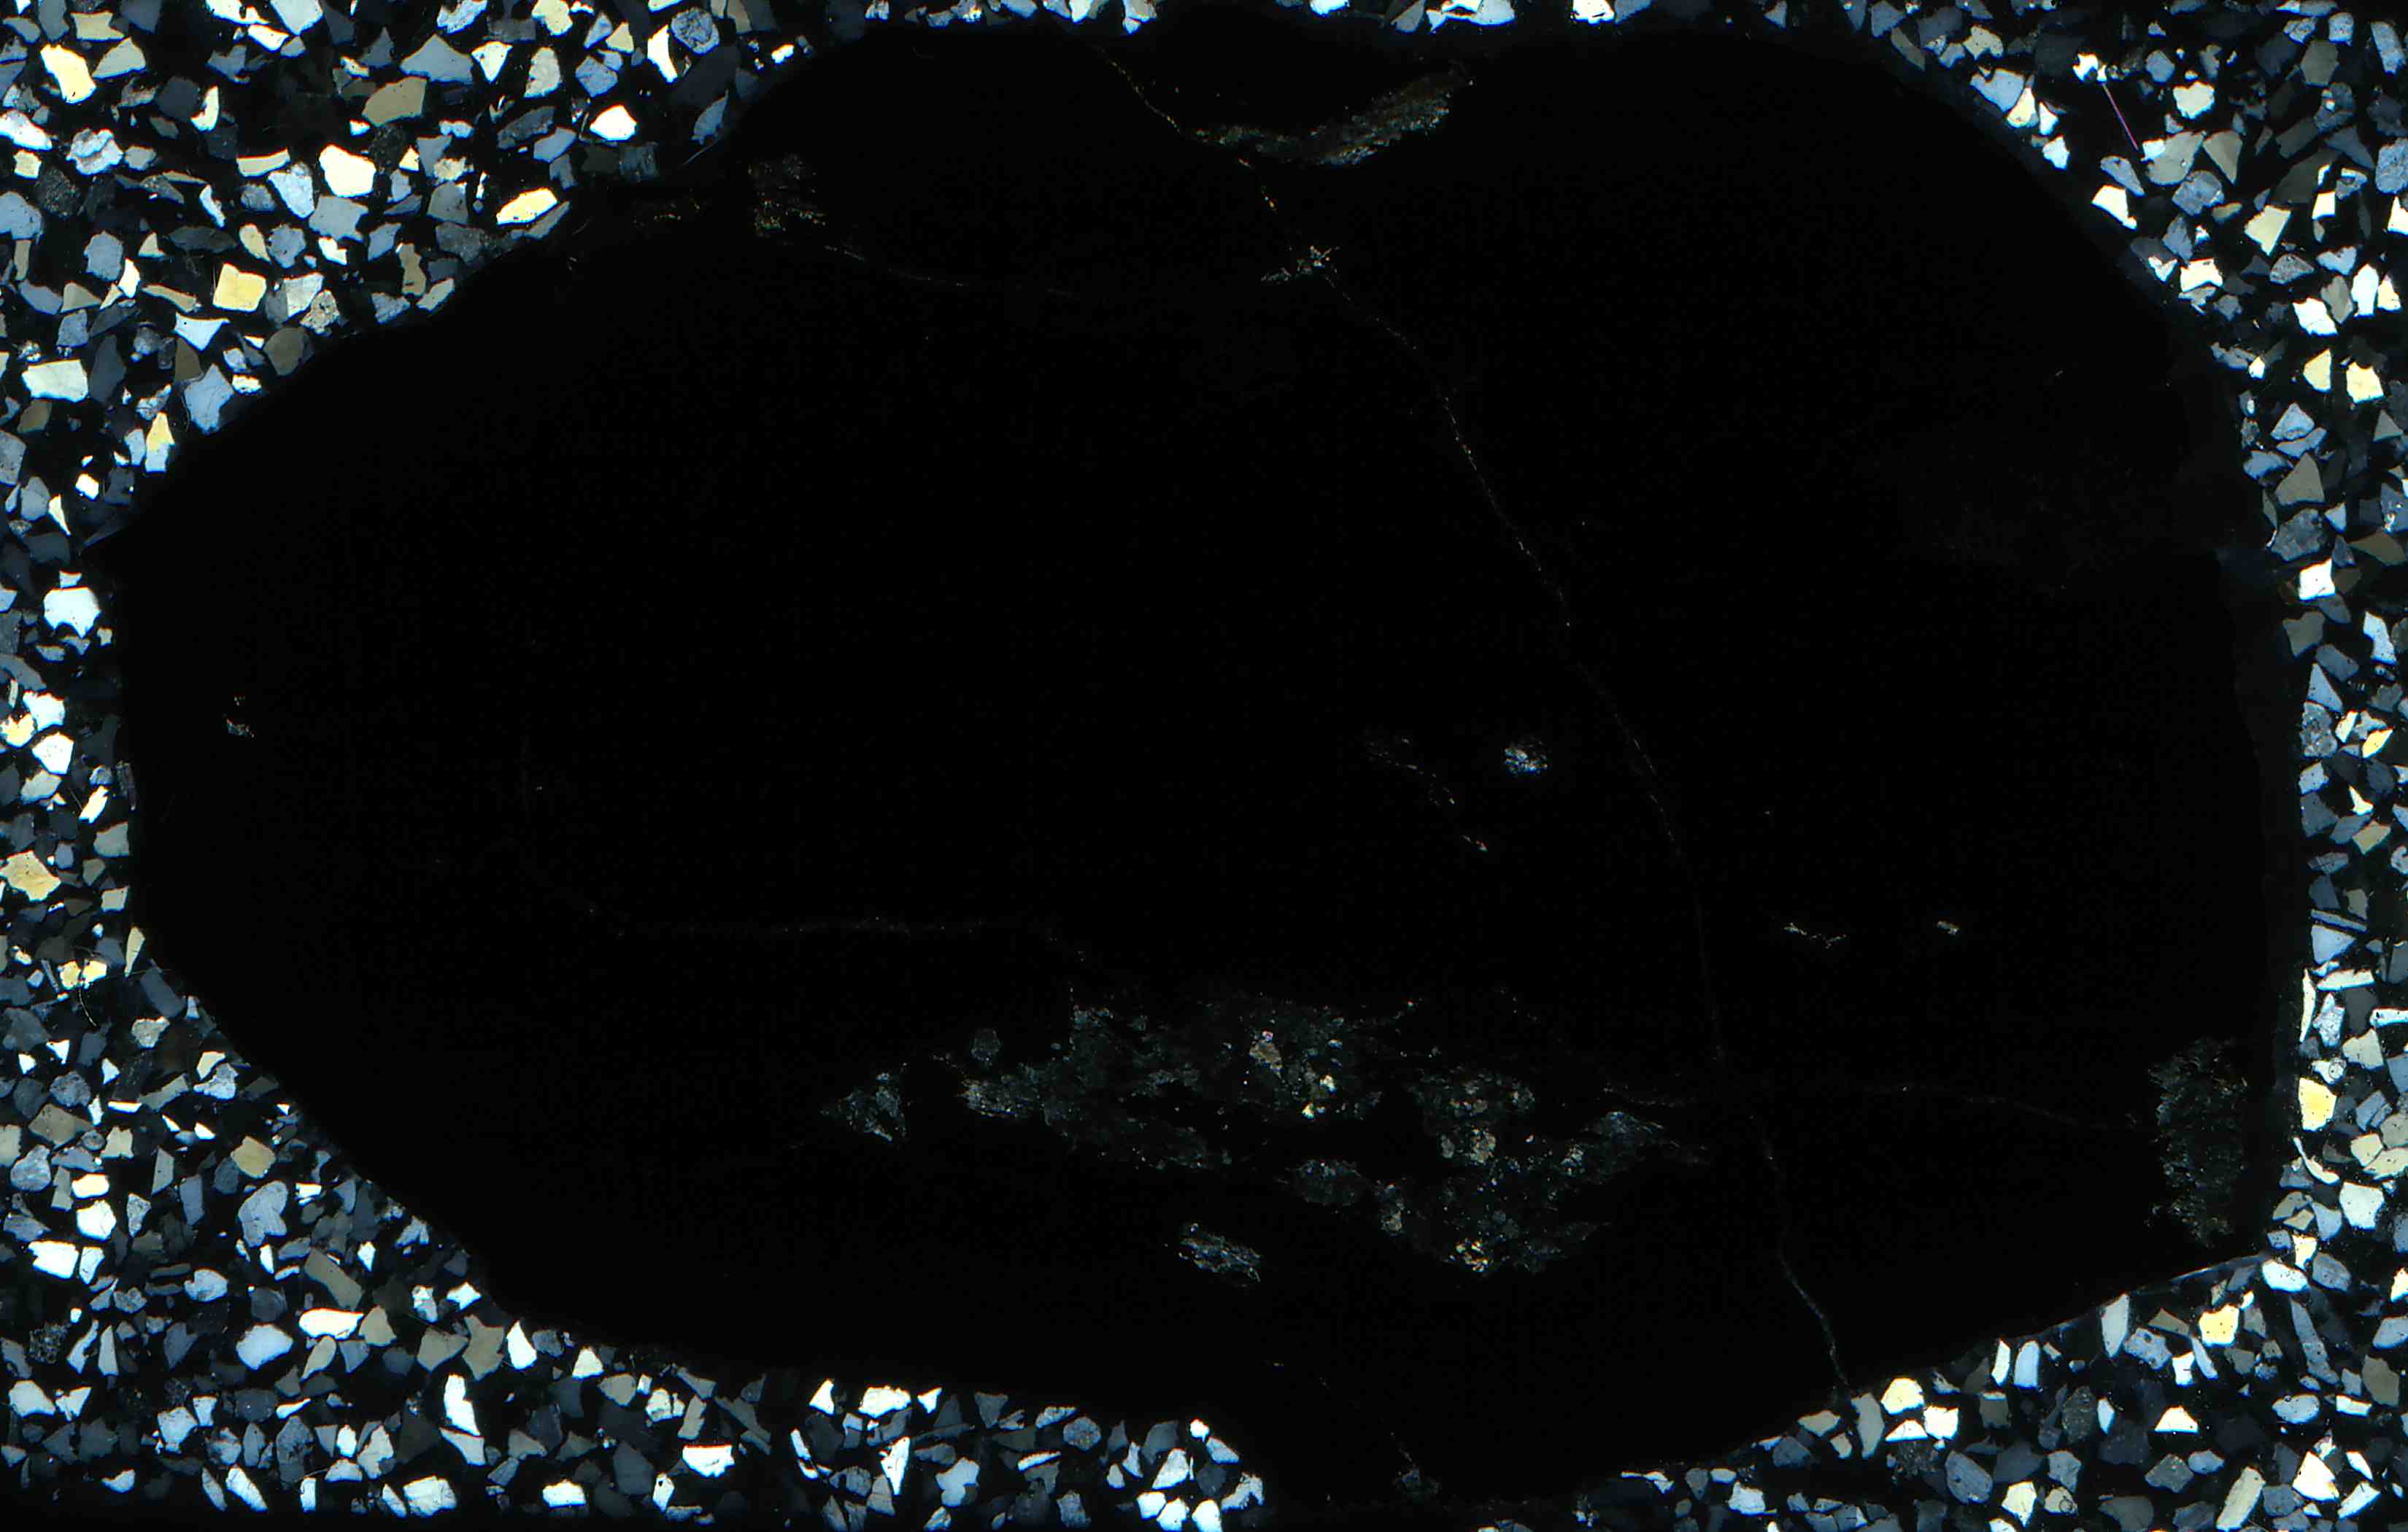 Ruoutevare Sweden hogbomite and hercynite in thin section